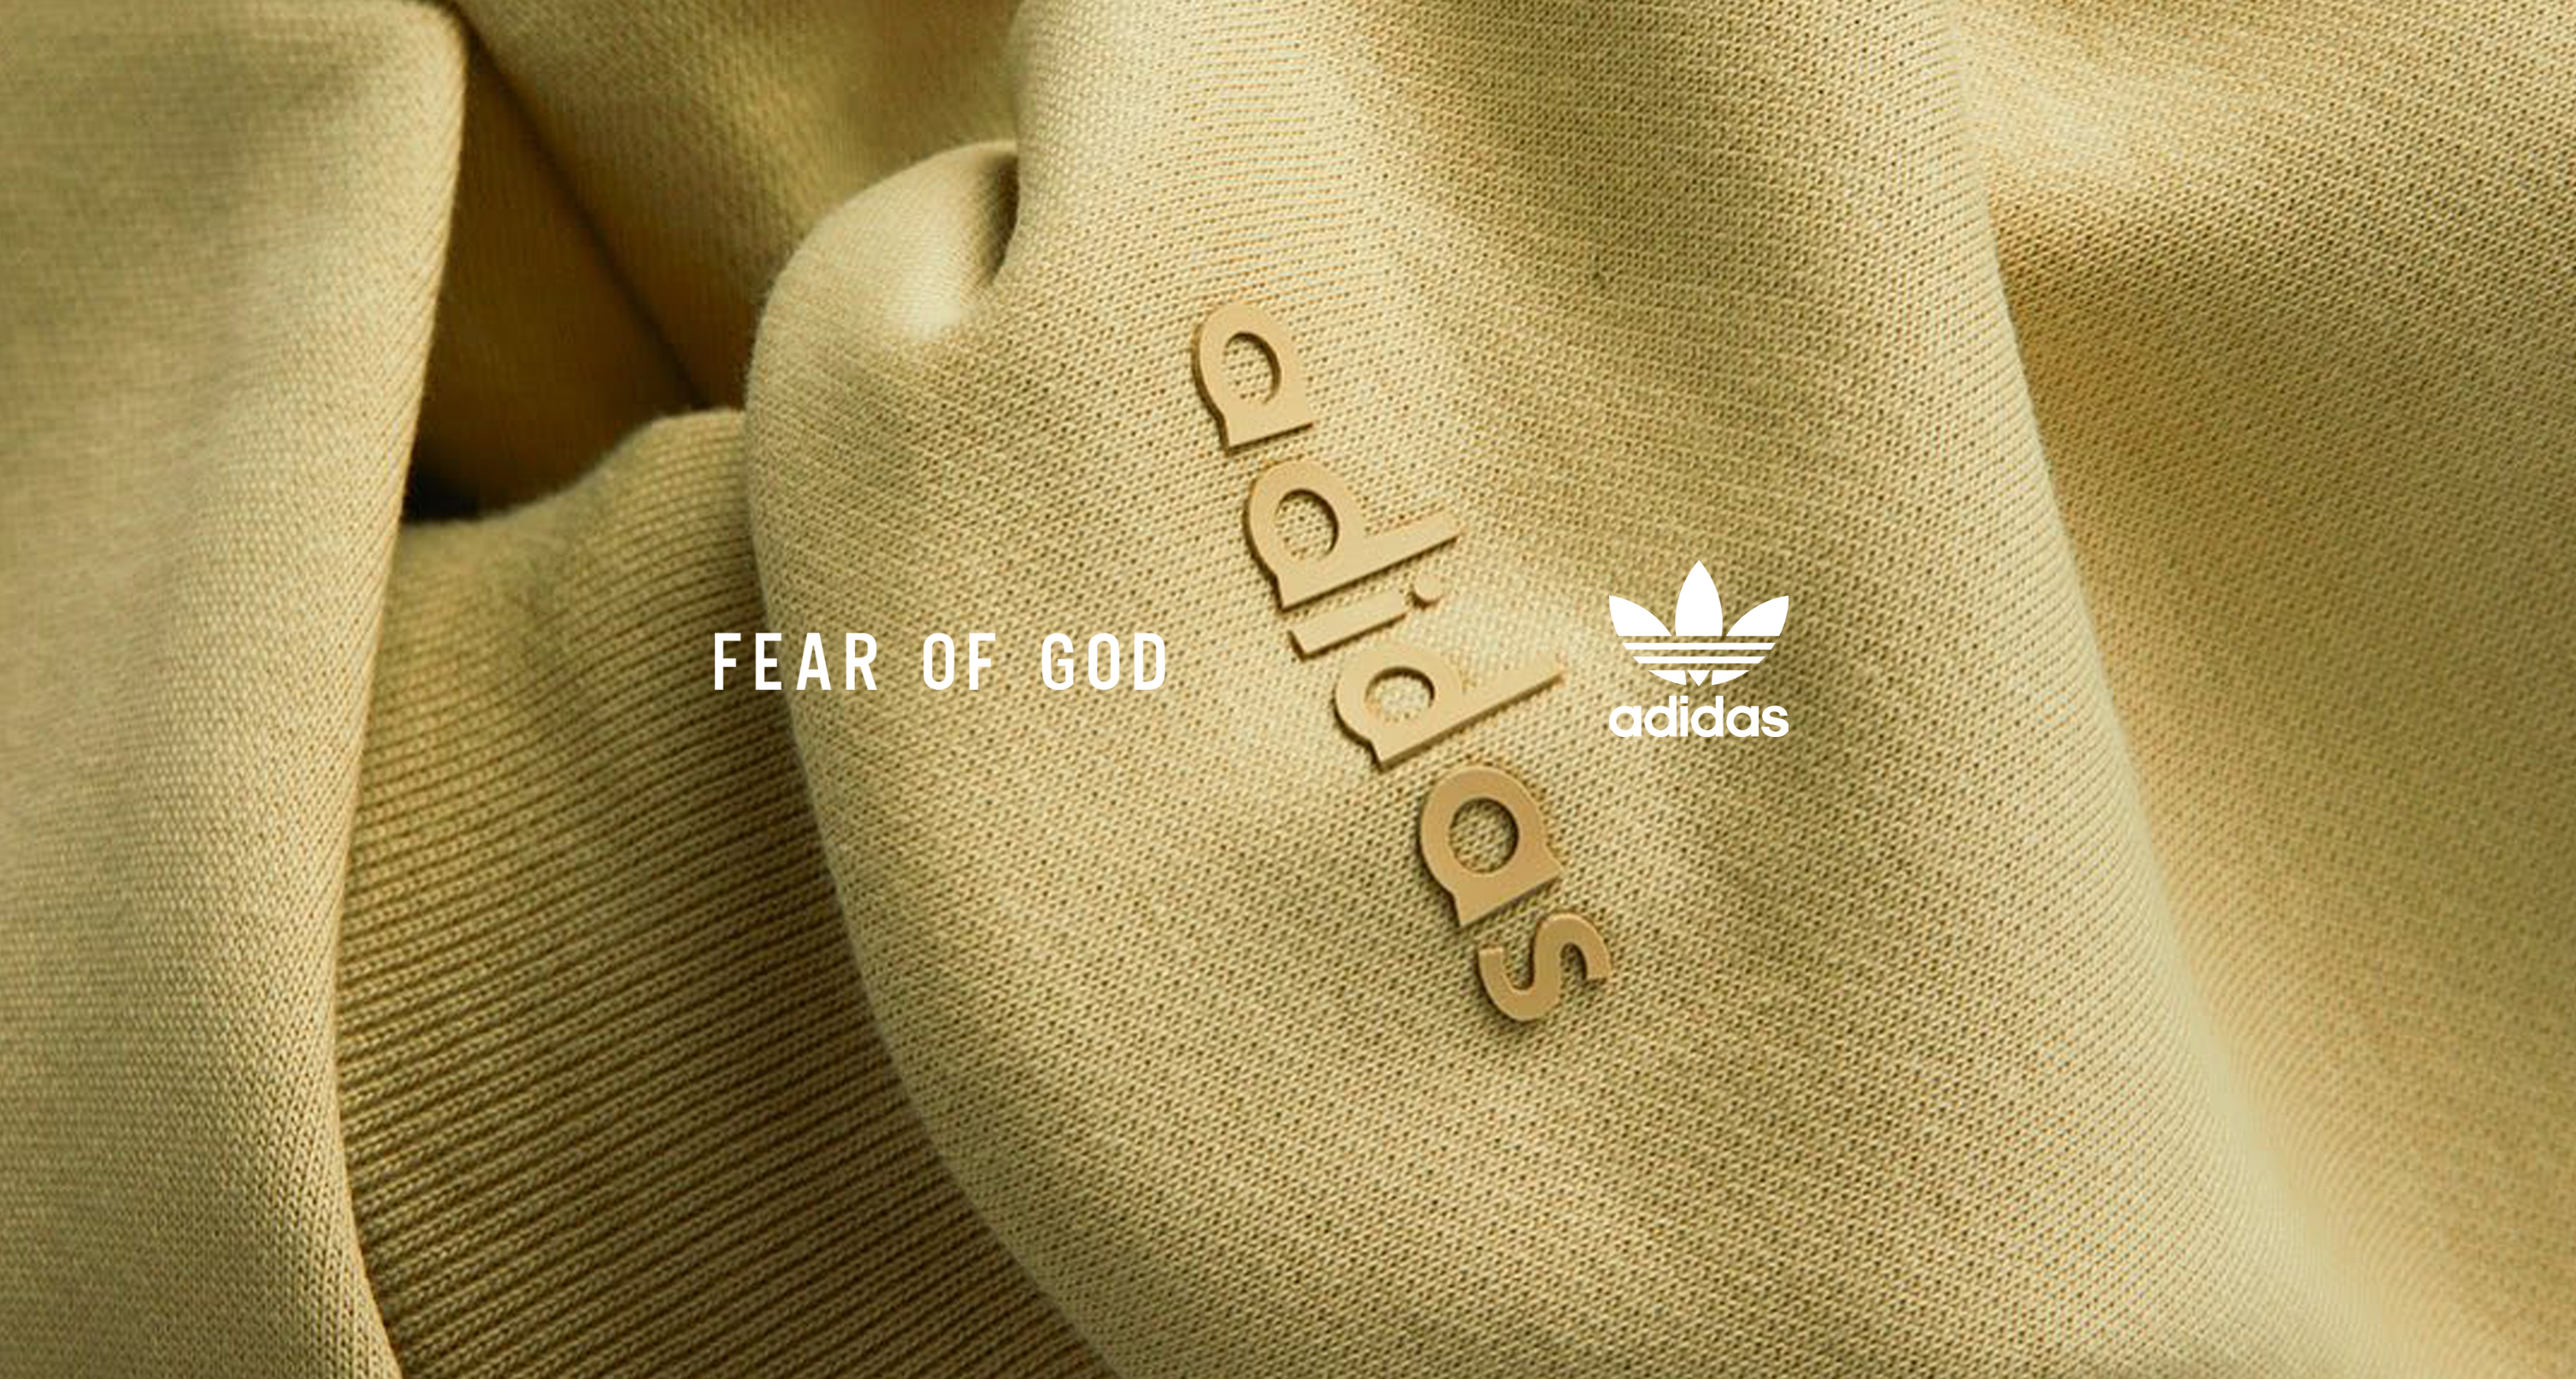 From Essentials to Adidas: What's next for Fear of God